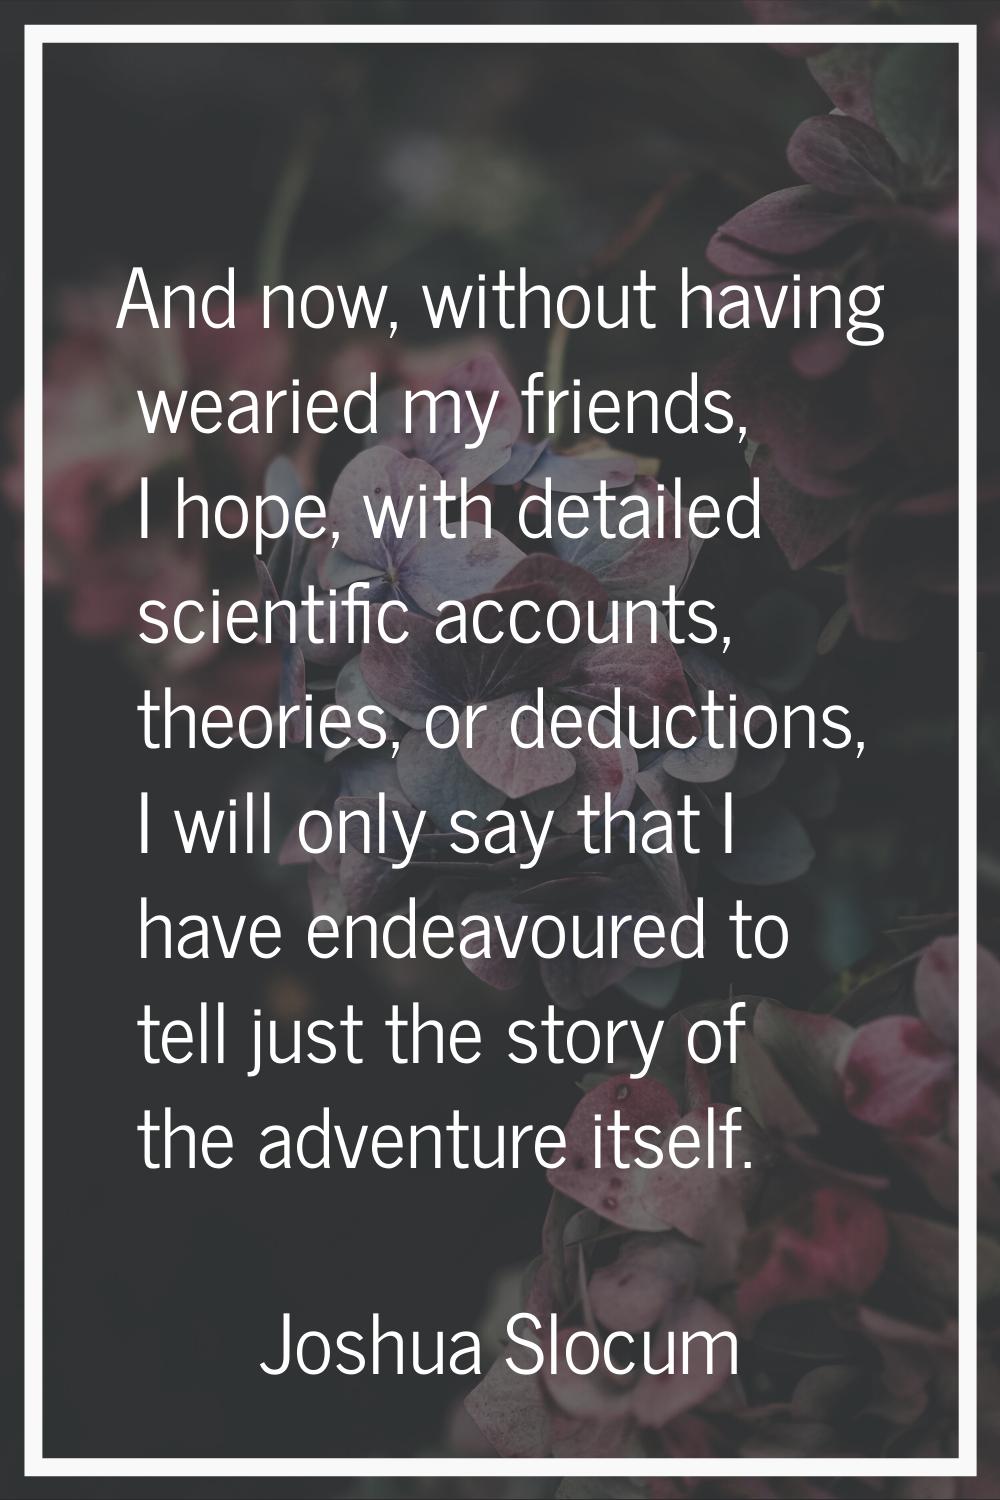 And now, without having wearied my friends, I hope, with detailed scientific accounts, theories, or